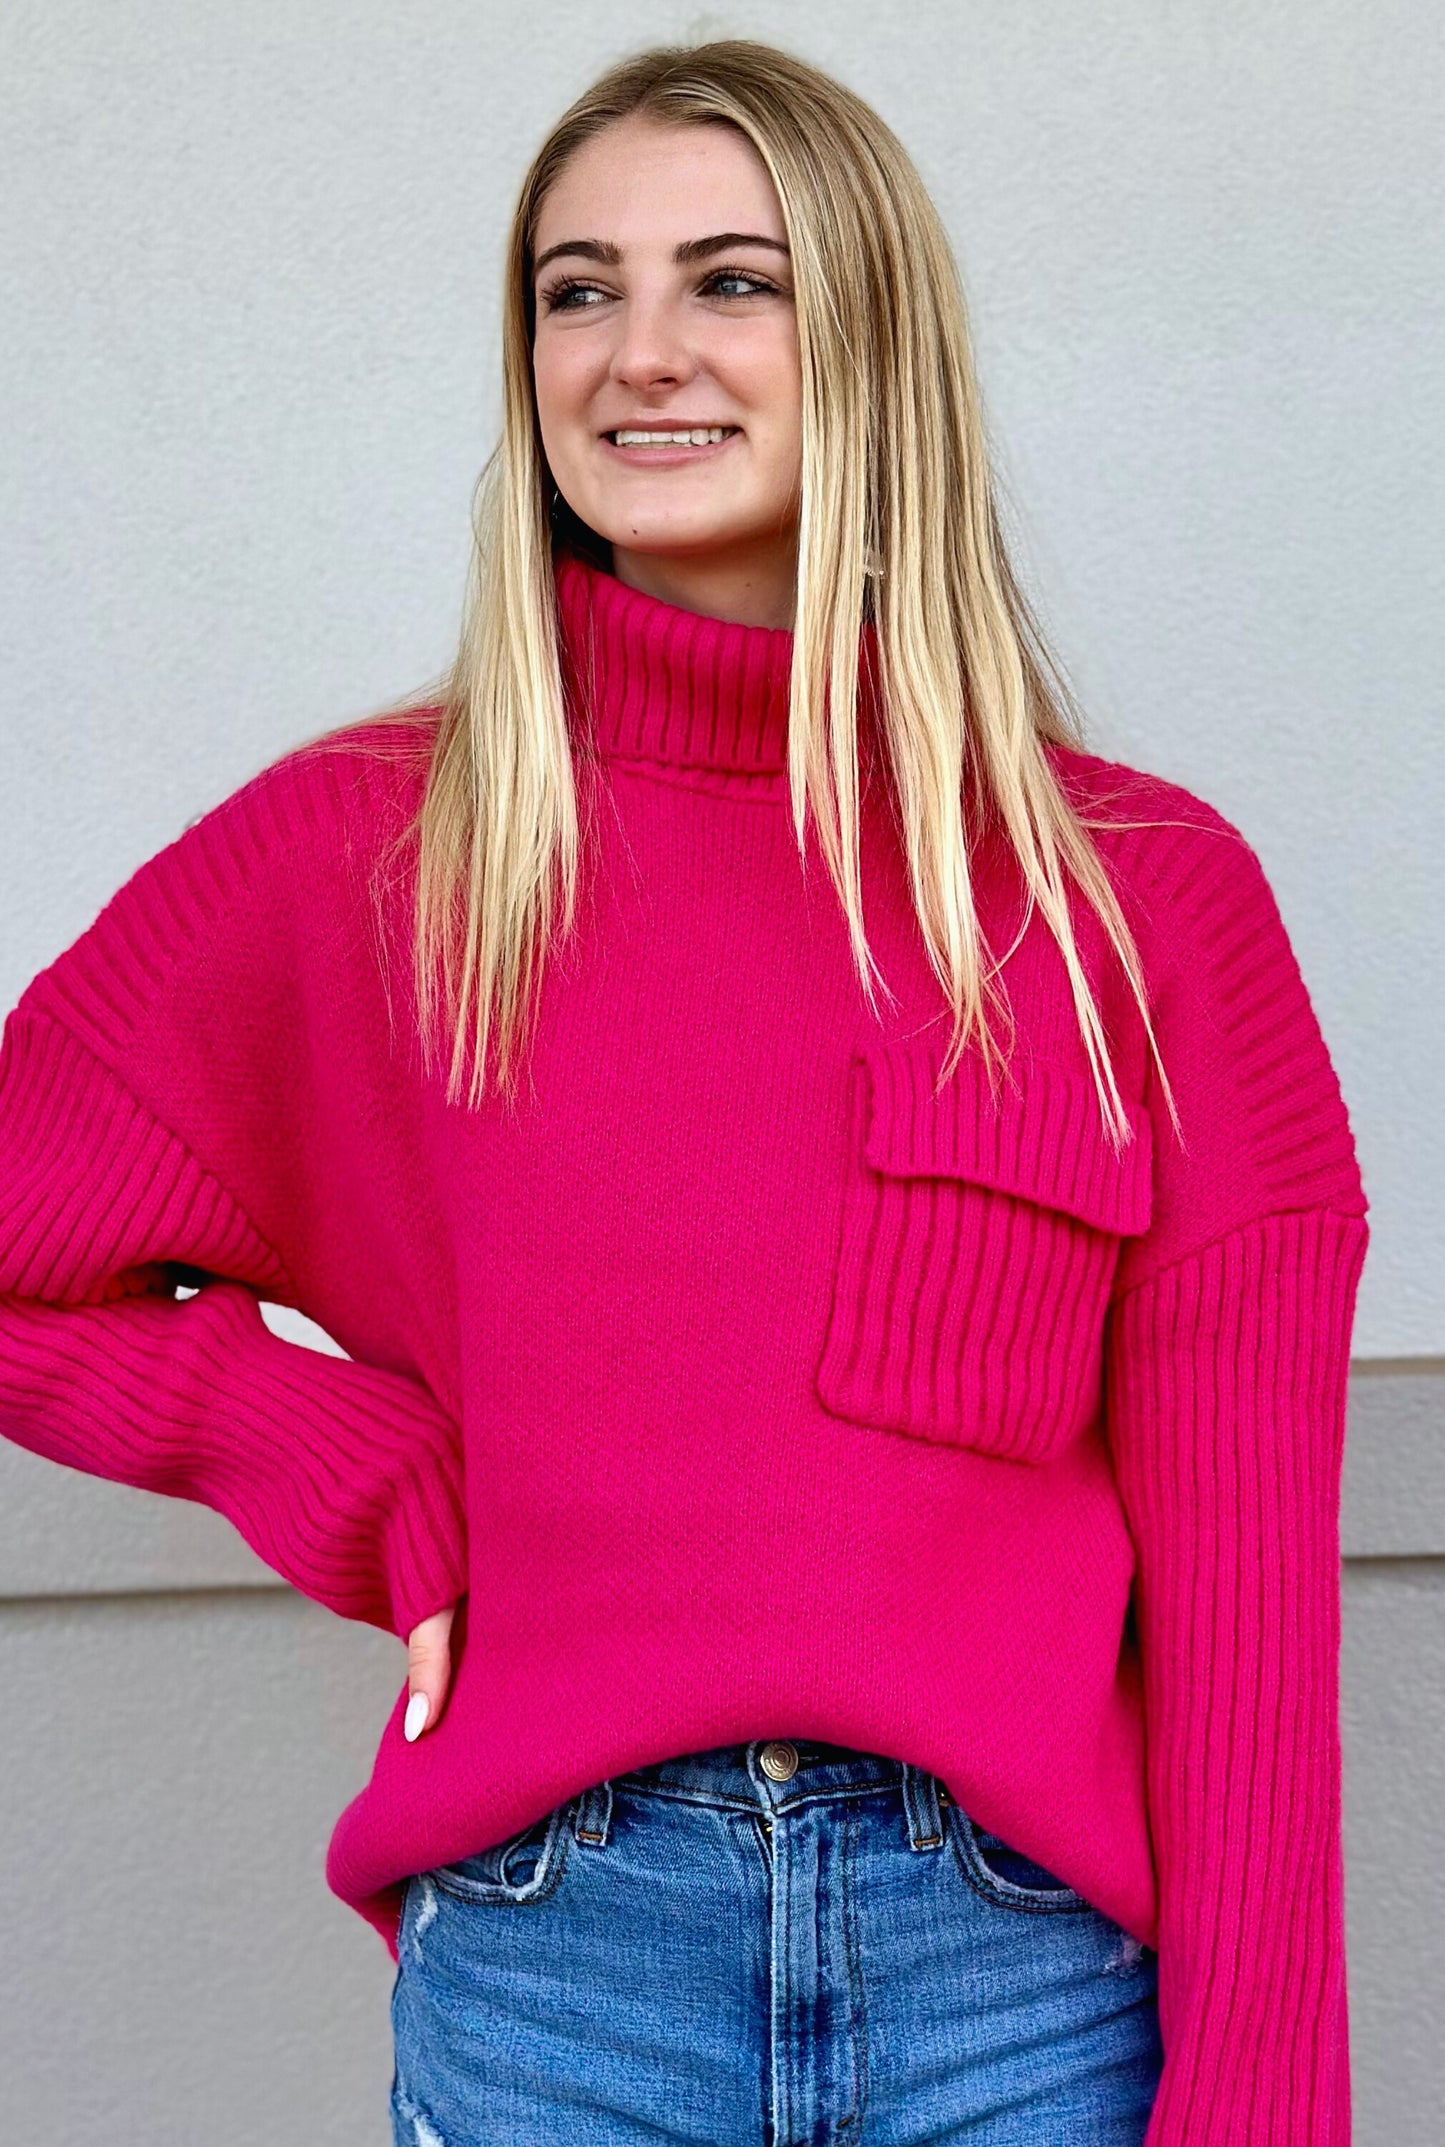 PINK SWEATER TOP